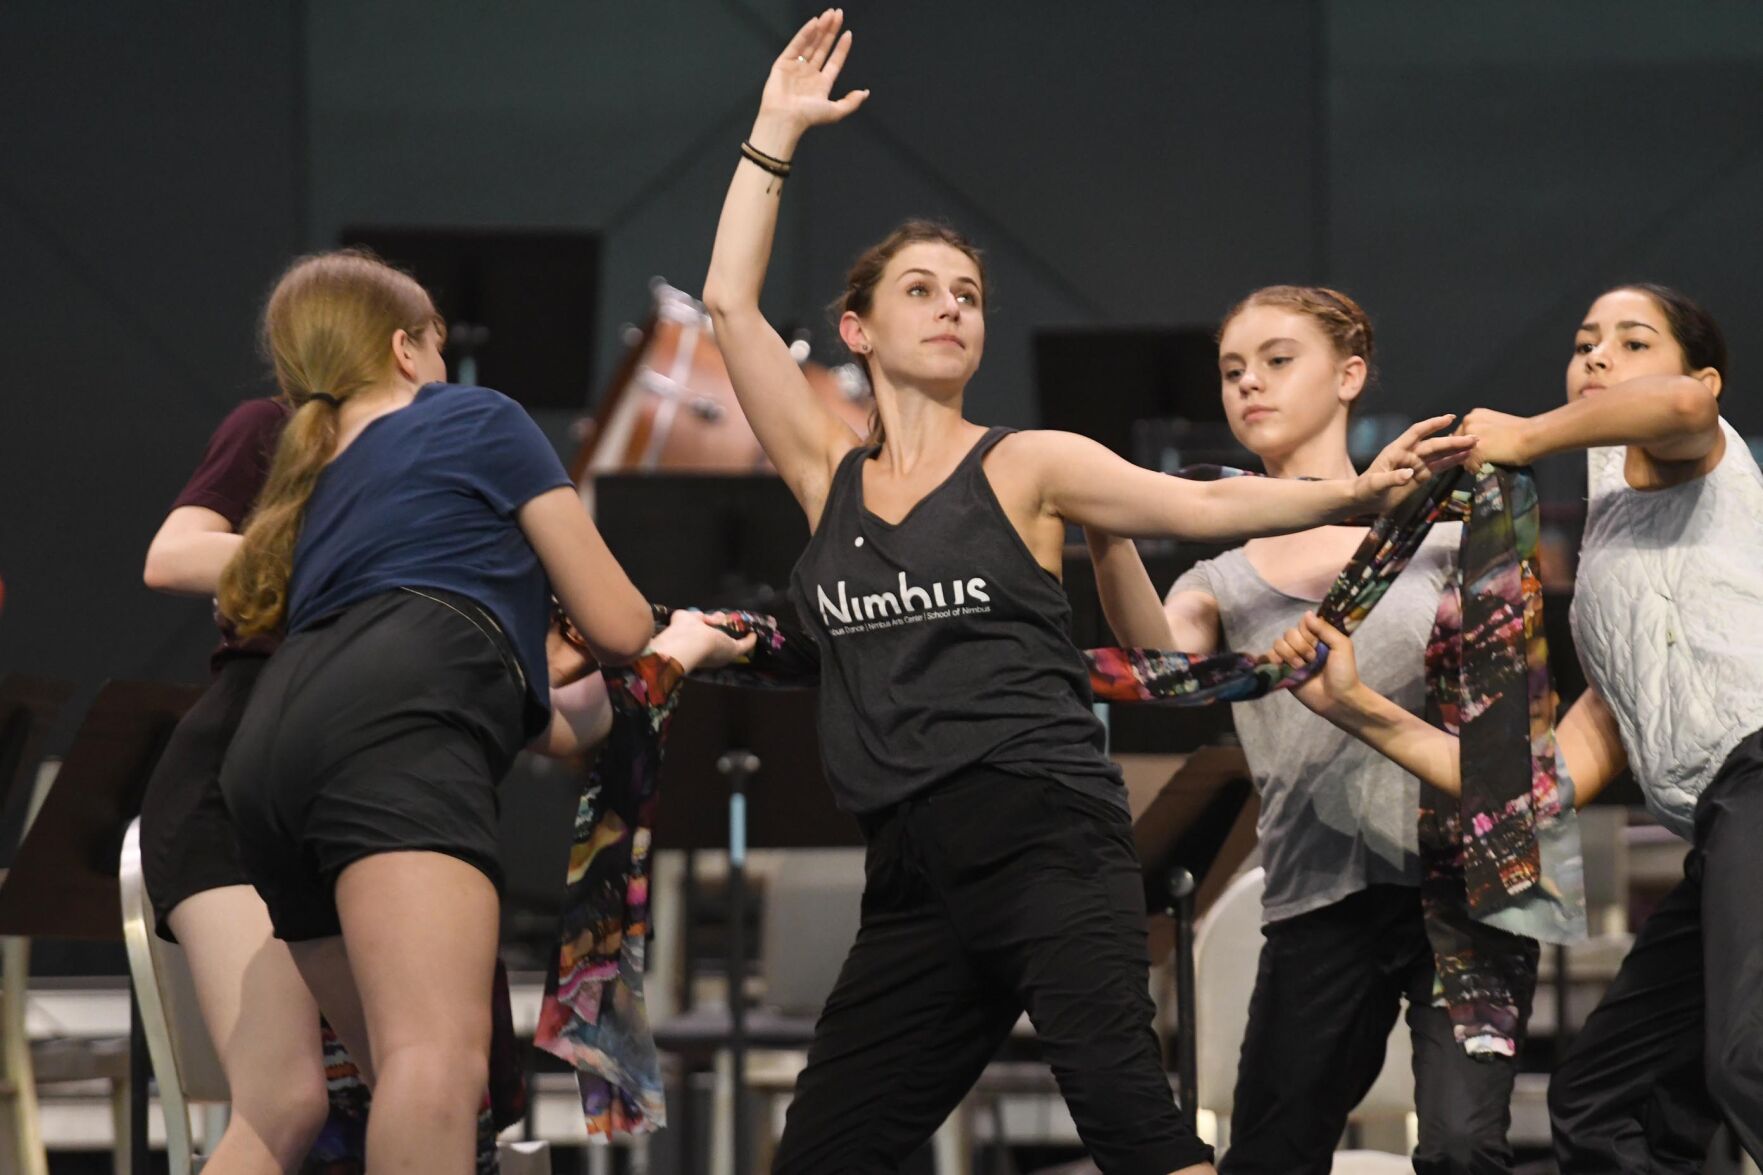 Berkshire youth dancers will take the stage at Tanglewood with 